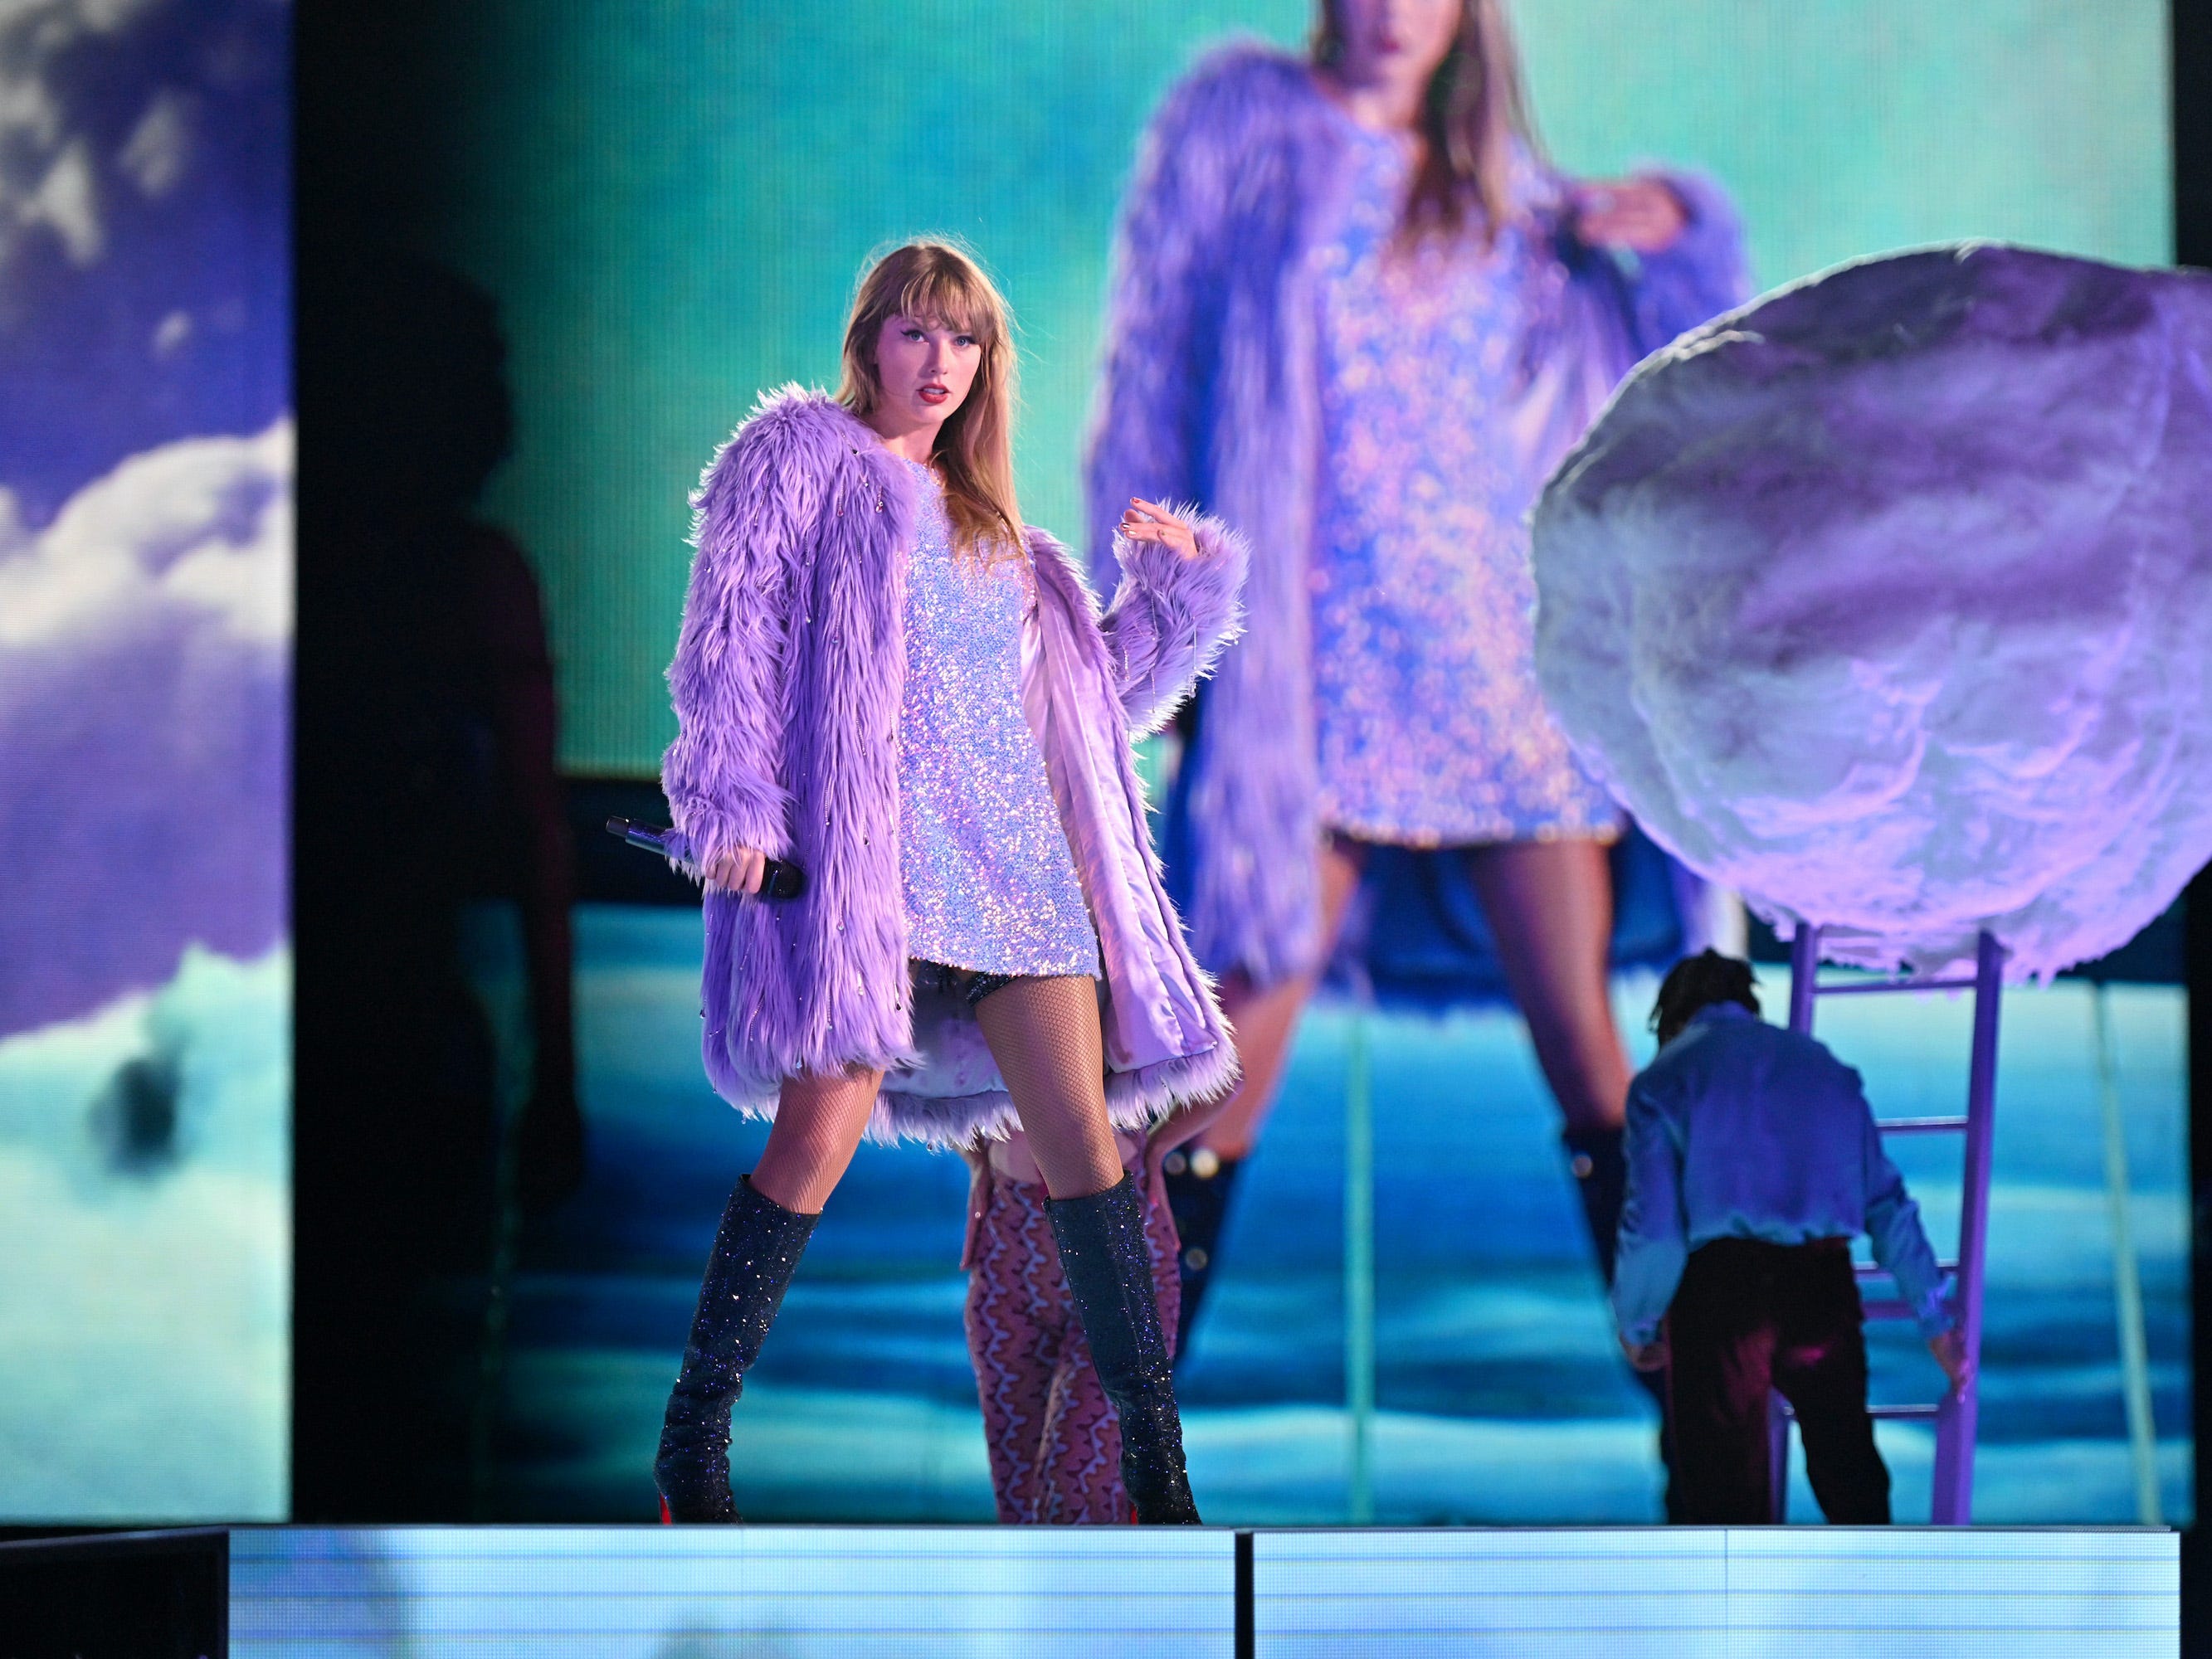 <p>The fuzzy coat that opens the "Midnights" segment is a reference to <a href="https://www.businessinsider.com/taylor-swift-lavender-haze-music-video-details-easter-eggs-2023-1">the "Lavender Haze" music video</a>. This connection is most obvious when Swift wears the opalescent T-shirt dress underneath.</p><p>It kind of looks like Swift skinned a muppet to make this coat, but don't worry: she <a href="https://www.insider.com/taylor-swift-lavender-haze-video-behind-the-scenes-2023-3">confirmed in a behind-the-scenes clip</a> that she would never wear real fur.</p>